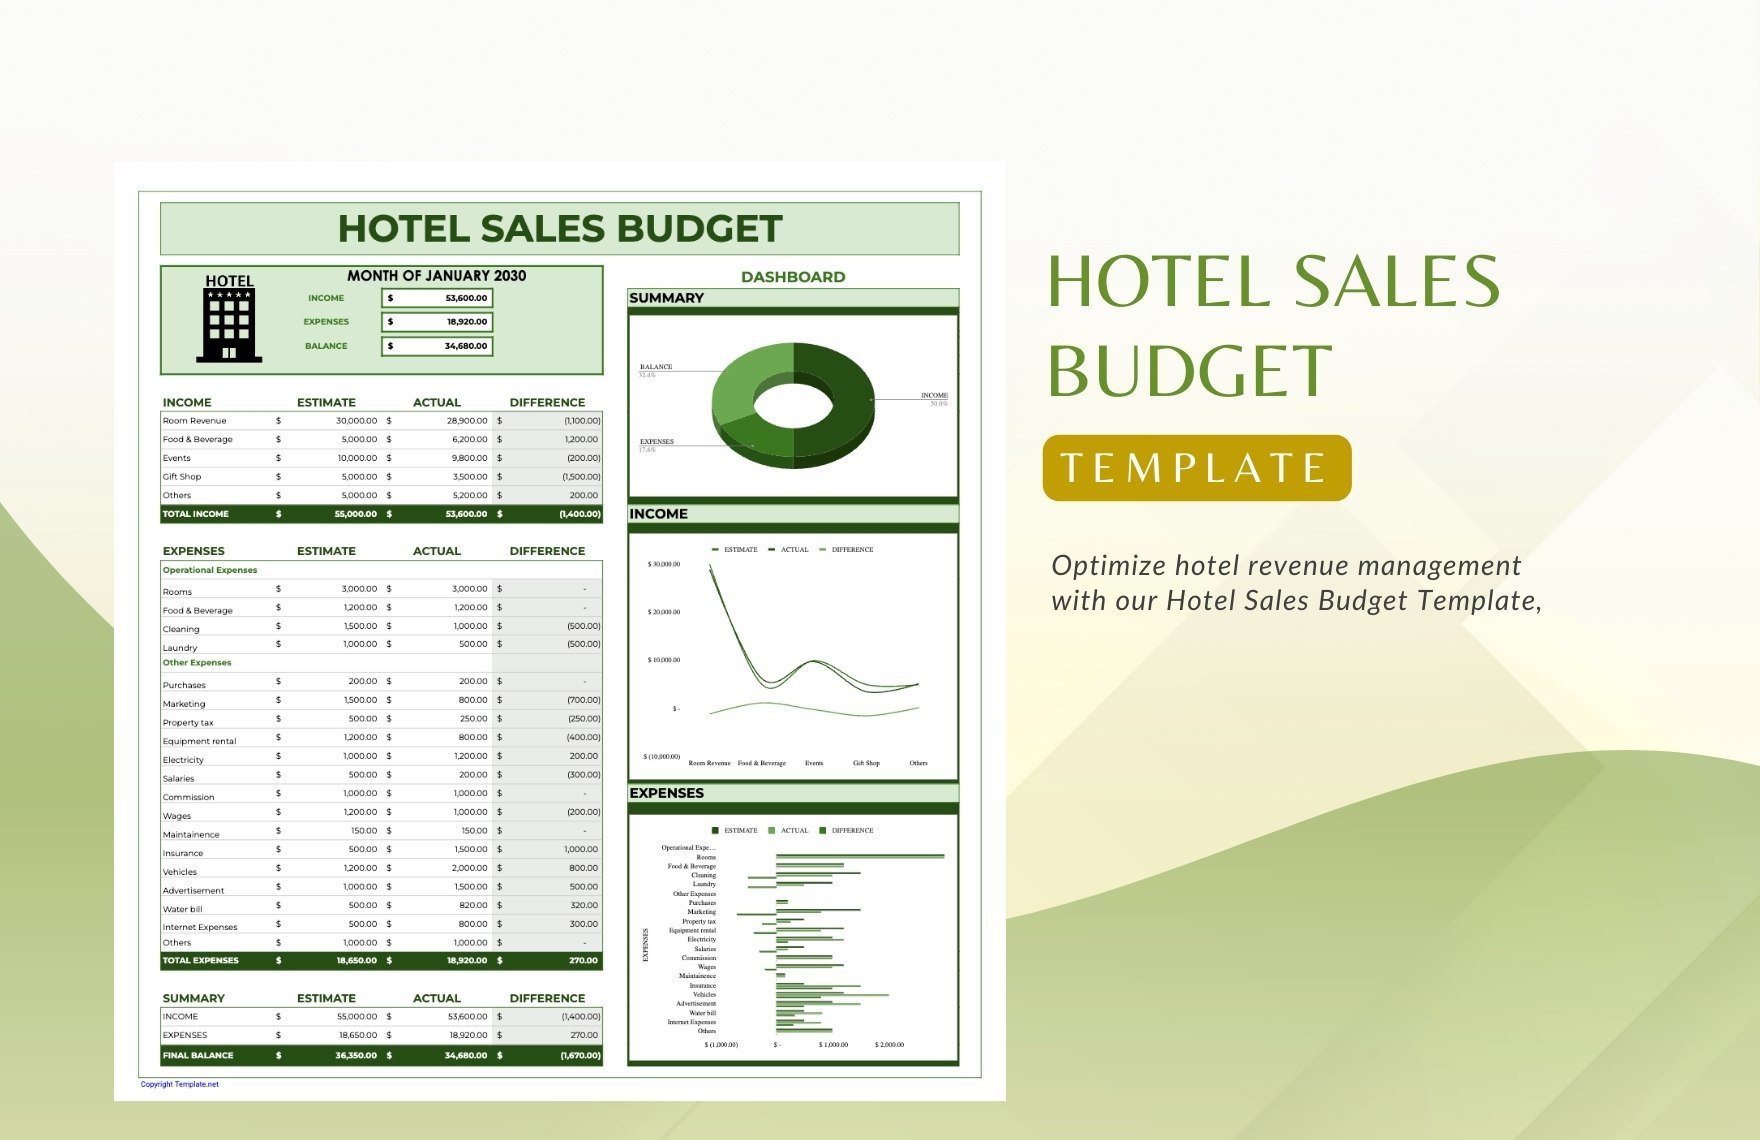 Hotel Sales Budget Template in Word, Google Docs, Excel, PDF, Google Sheets, Apple Pages, Apple Numbers